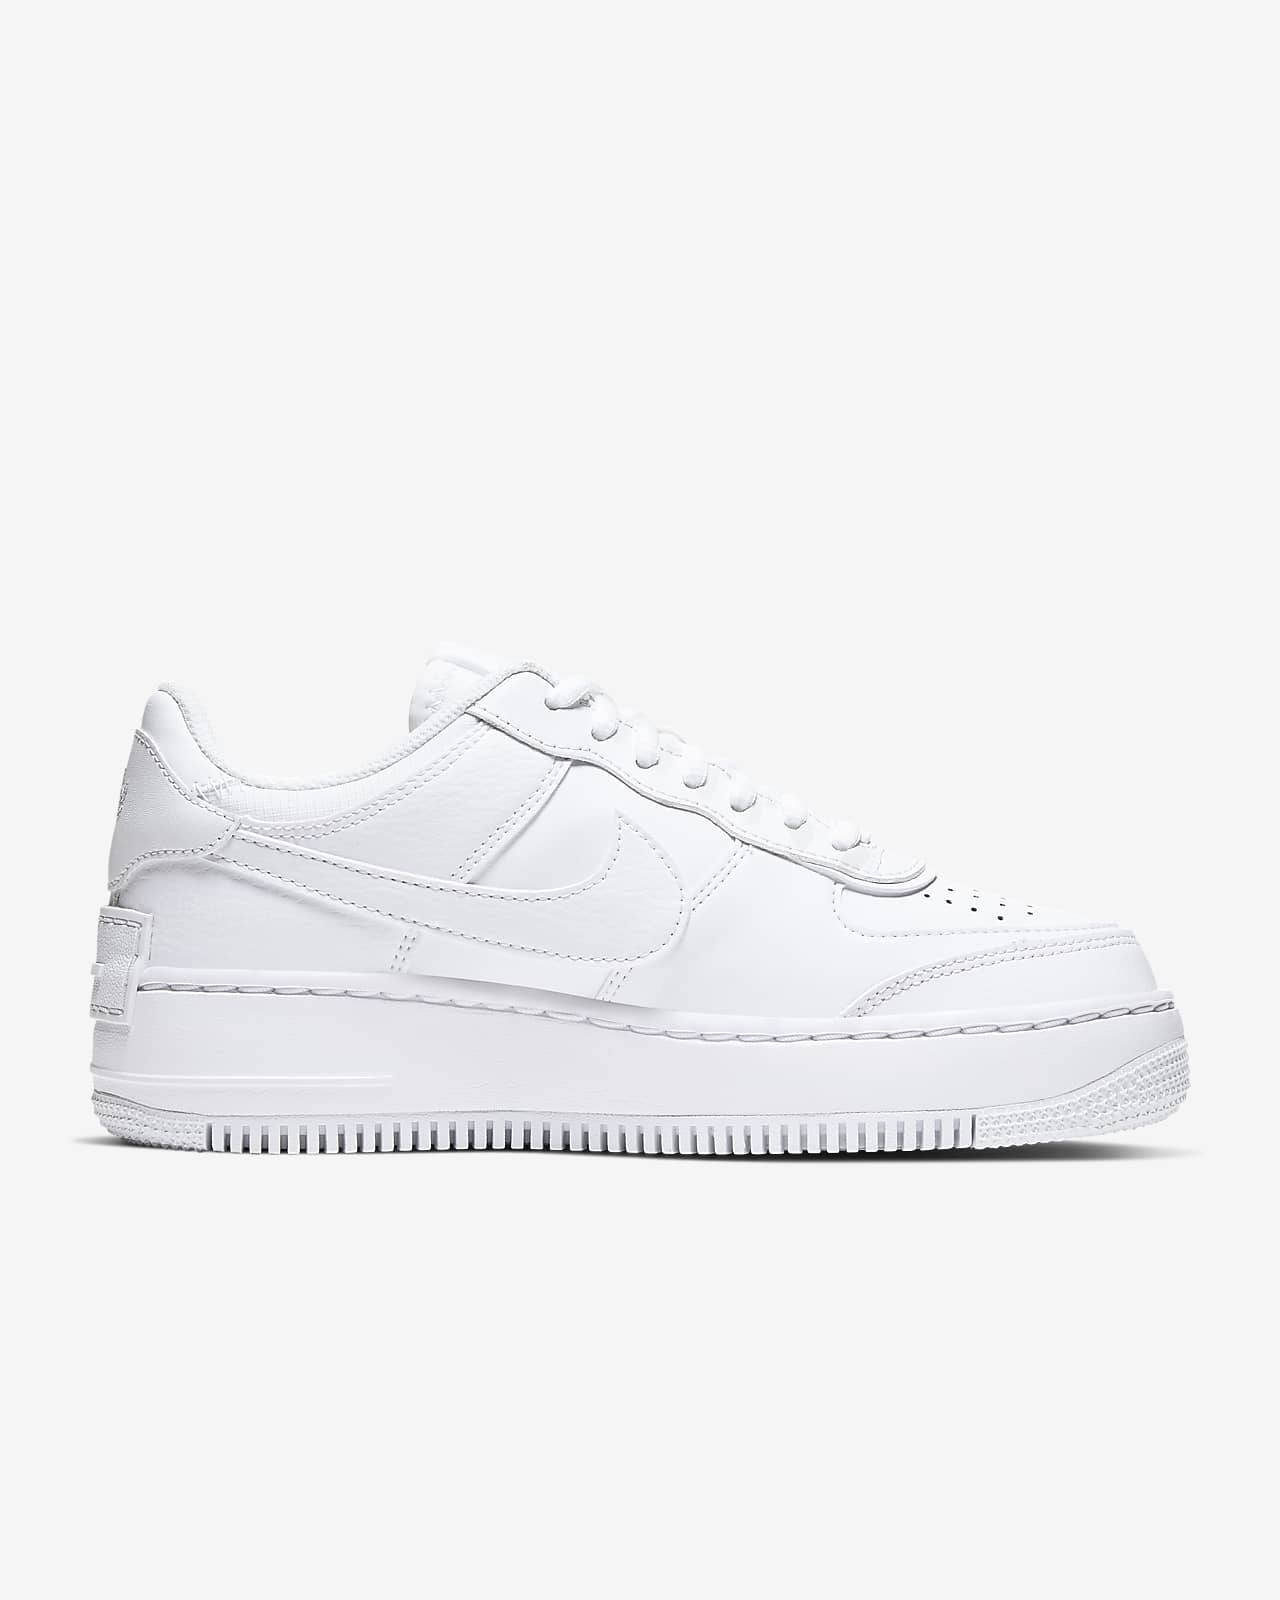 air force 1 donna bianche alte